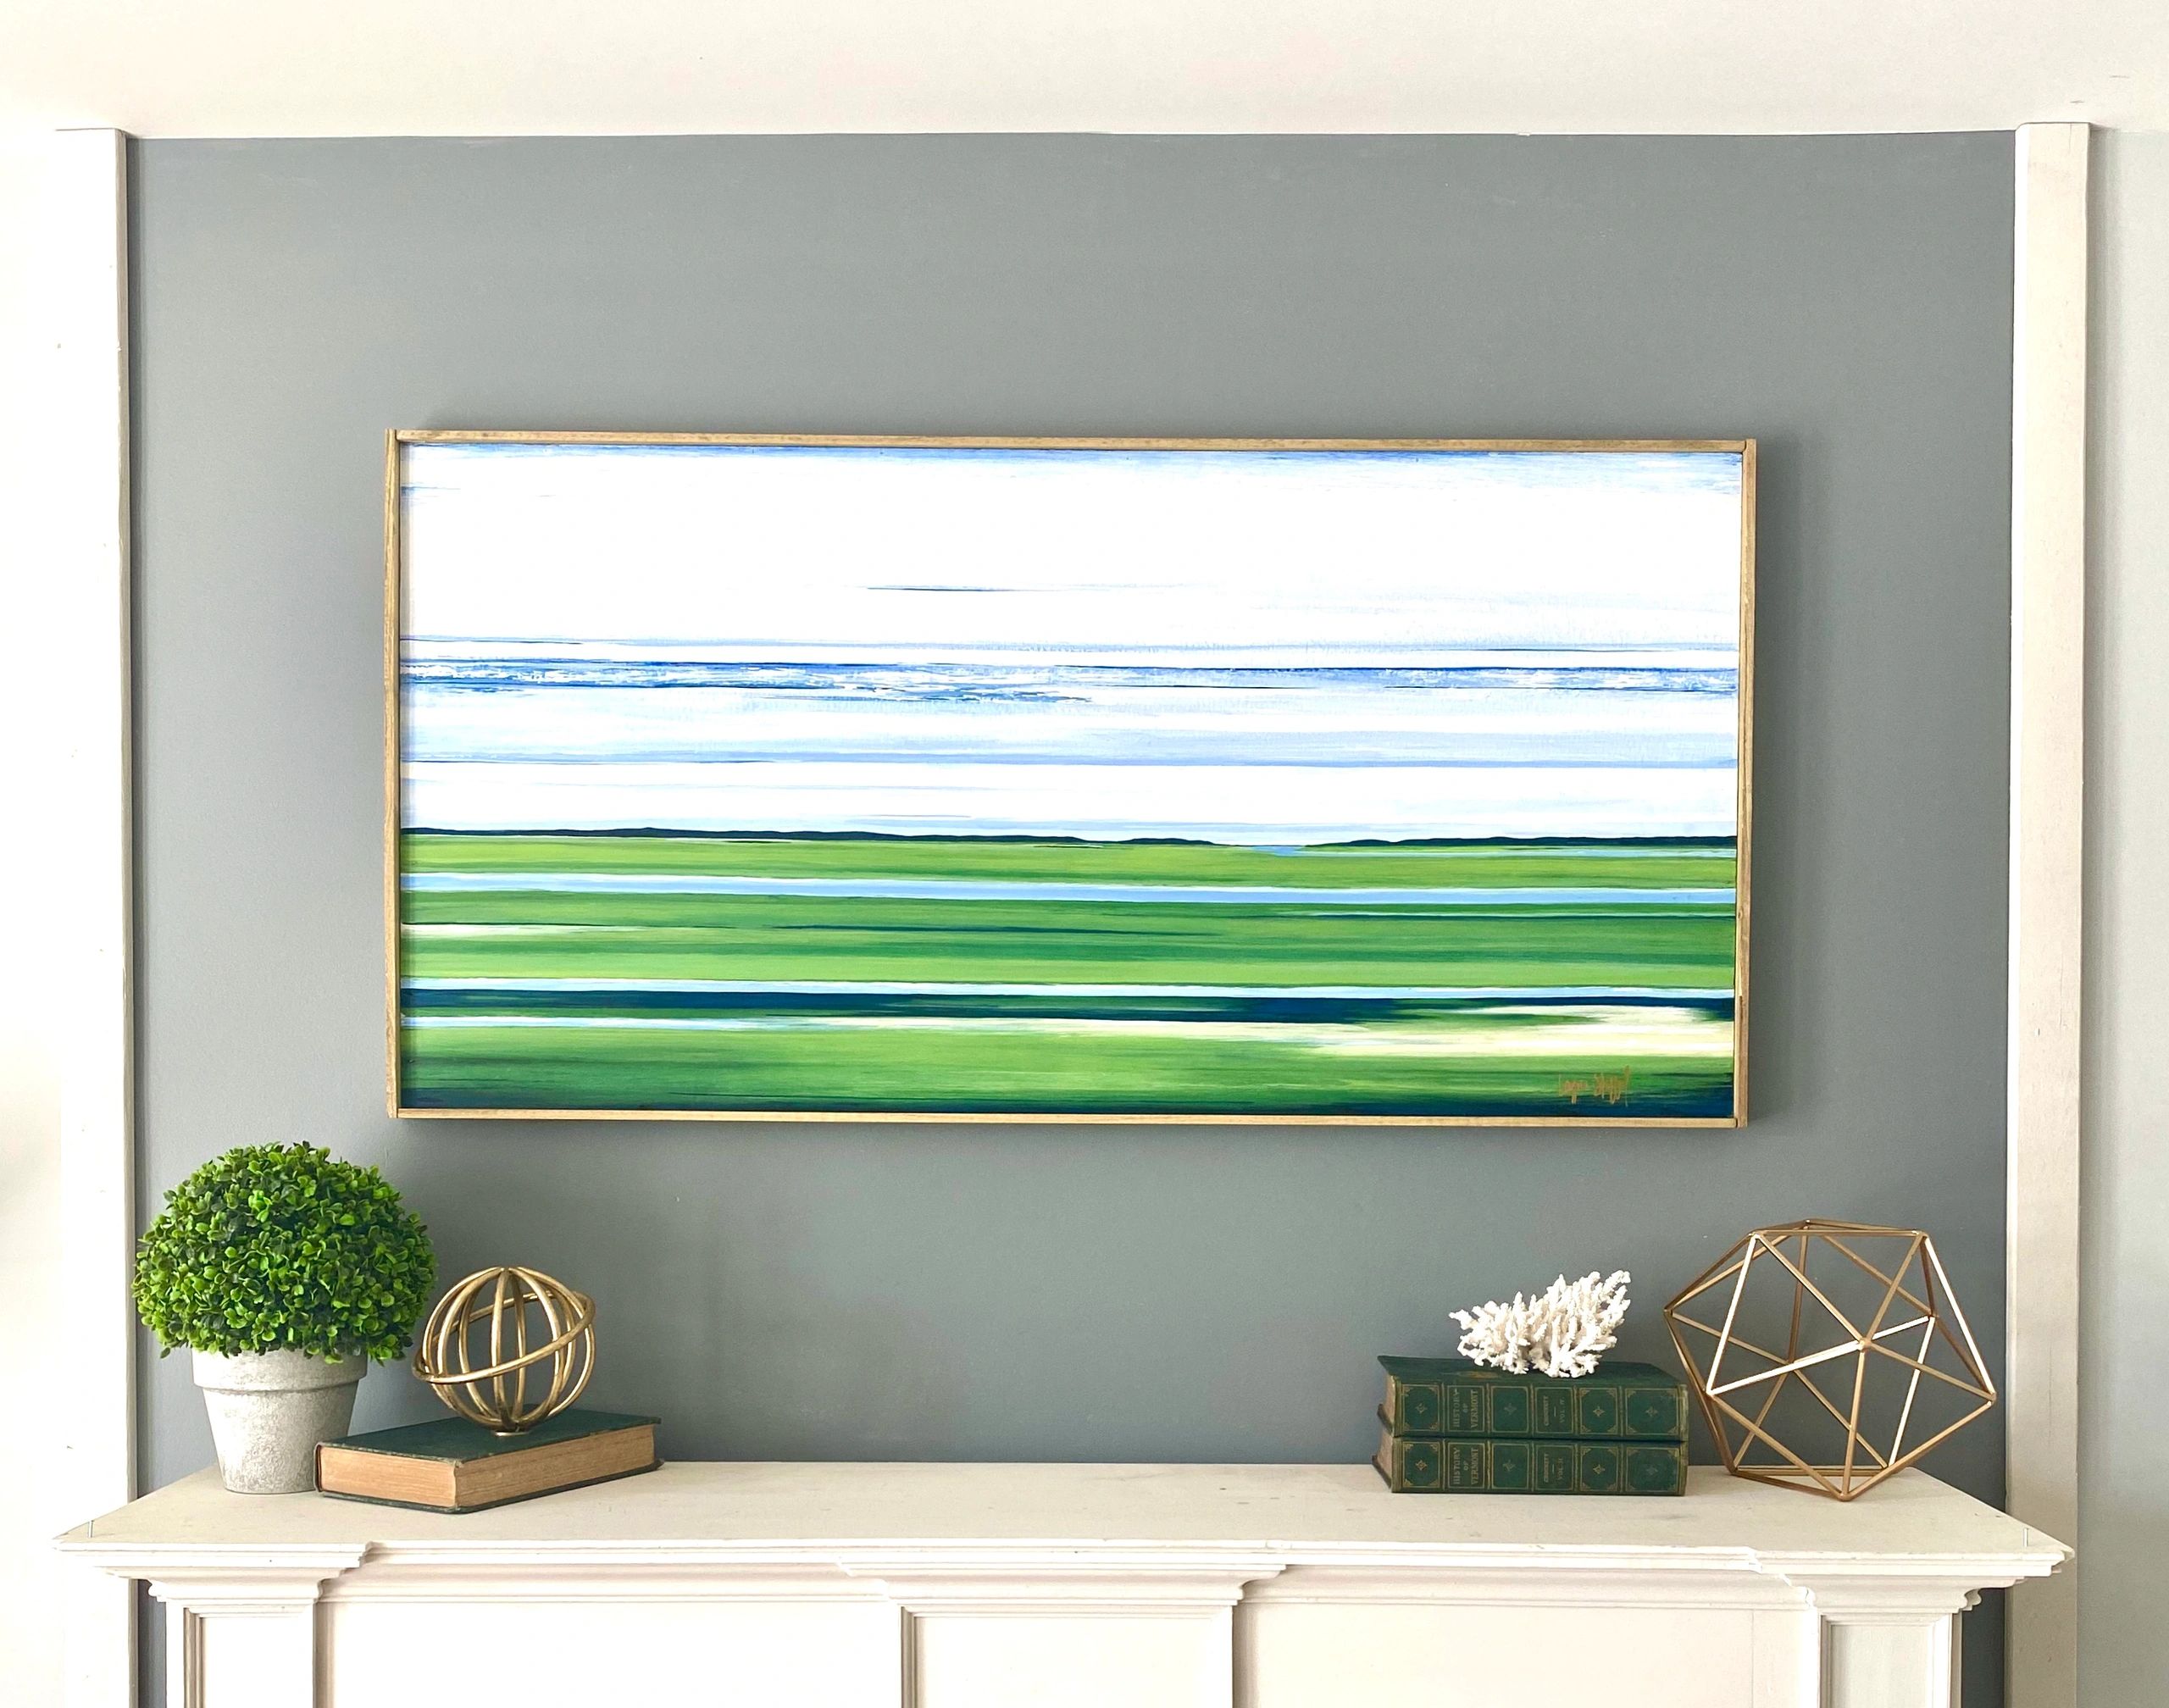 The Marsh series has been one of the most popular by far. It’s a quiet peace! 